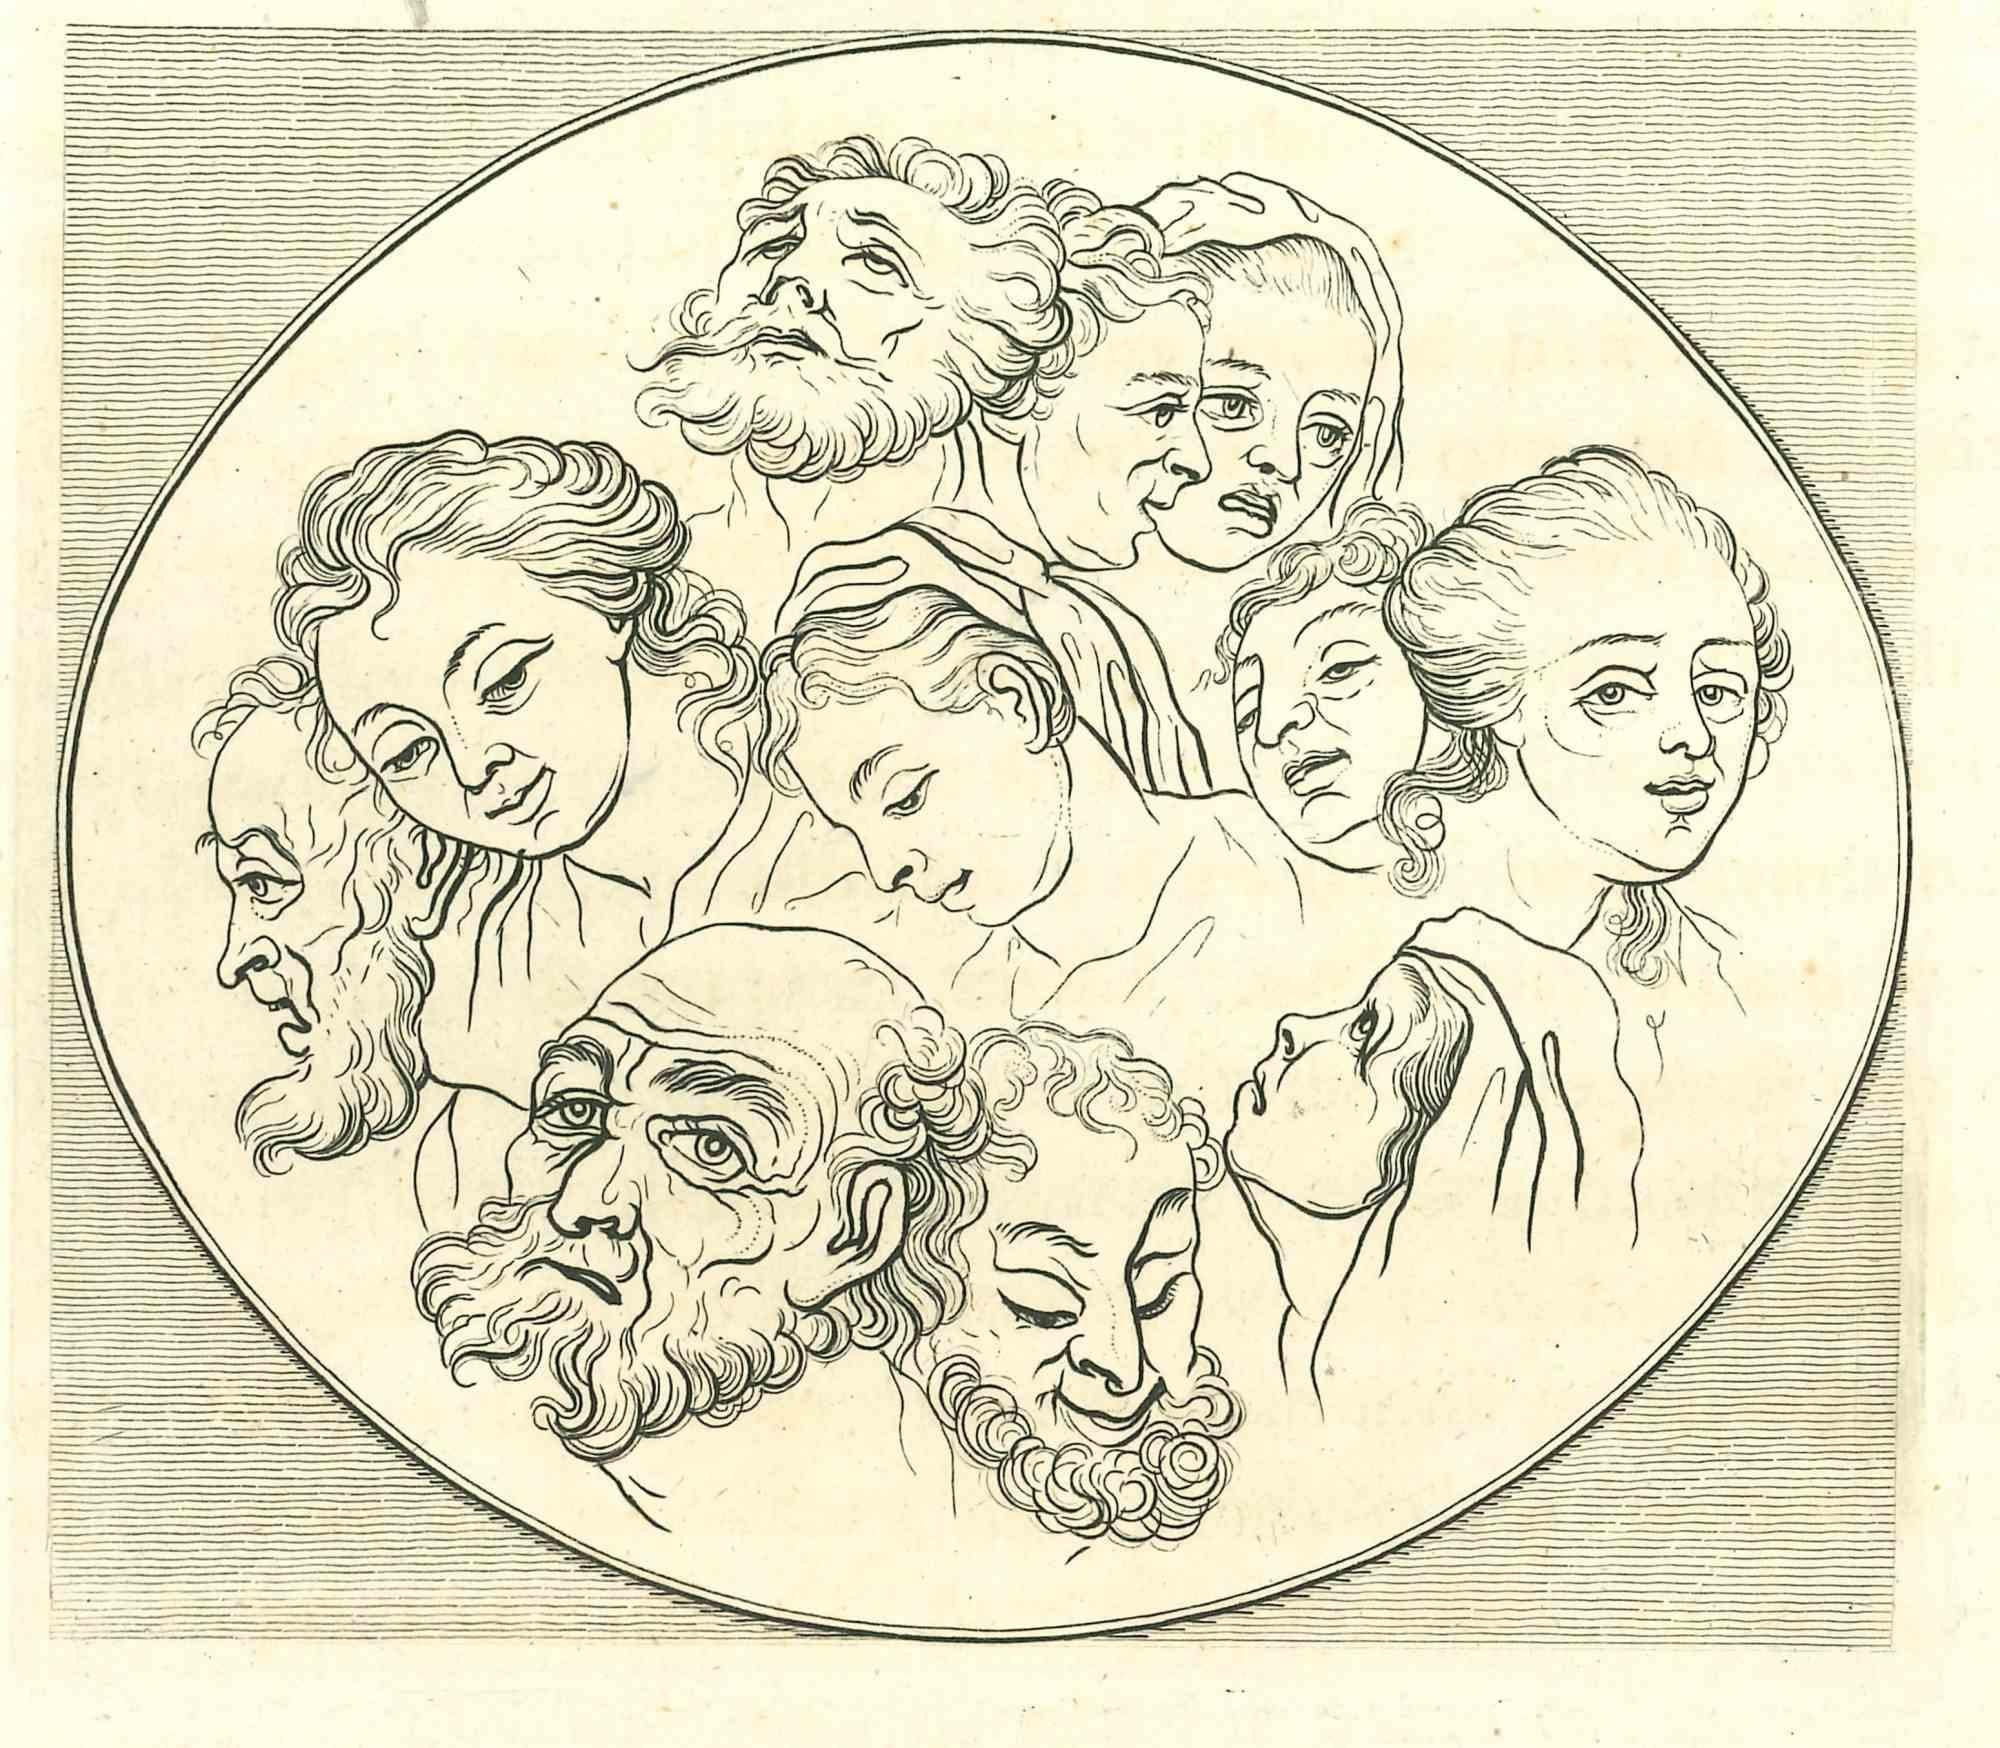 Portraits is an artwork realized by Thomas Holloway for Johann Caspar Lavater's  "Essays on Physiognomy, Designed to promote the Knowledge and the Love of Mankind", London, Bensley, 1810. 

 This artwork portrays historical faces. On the back of